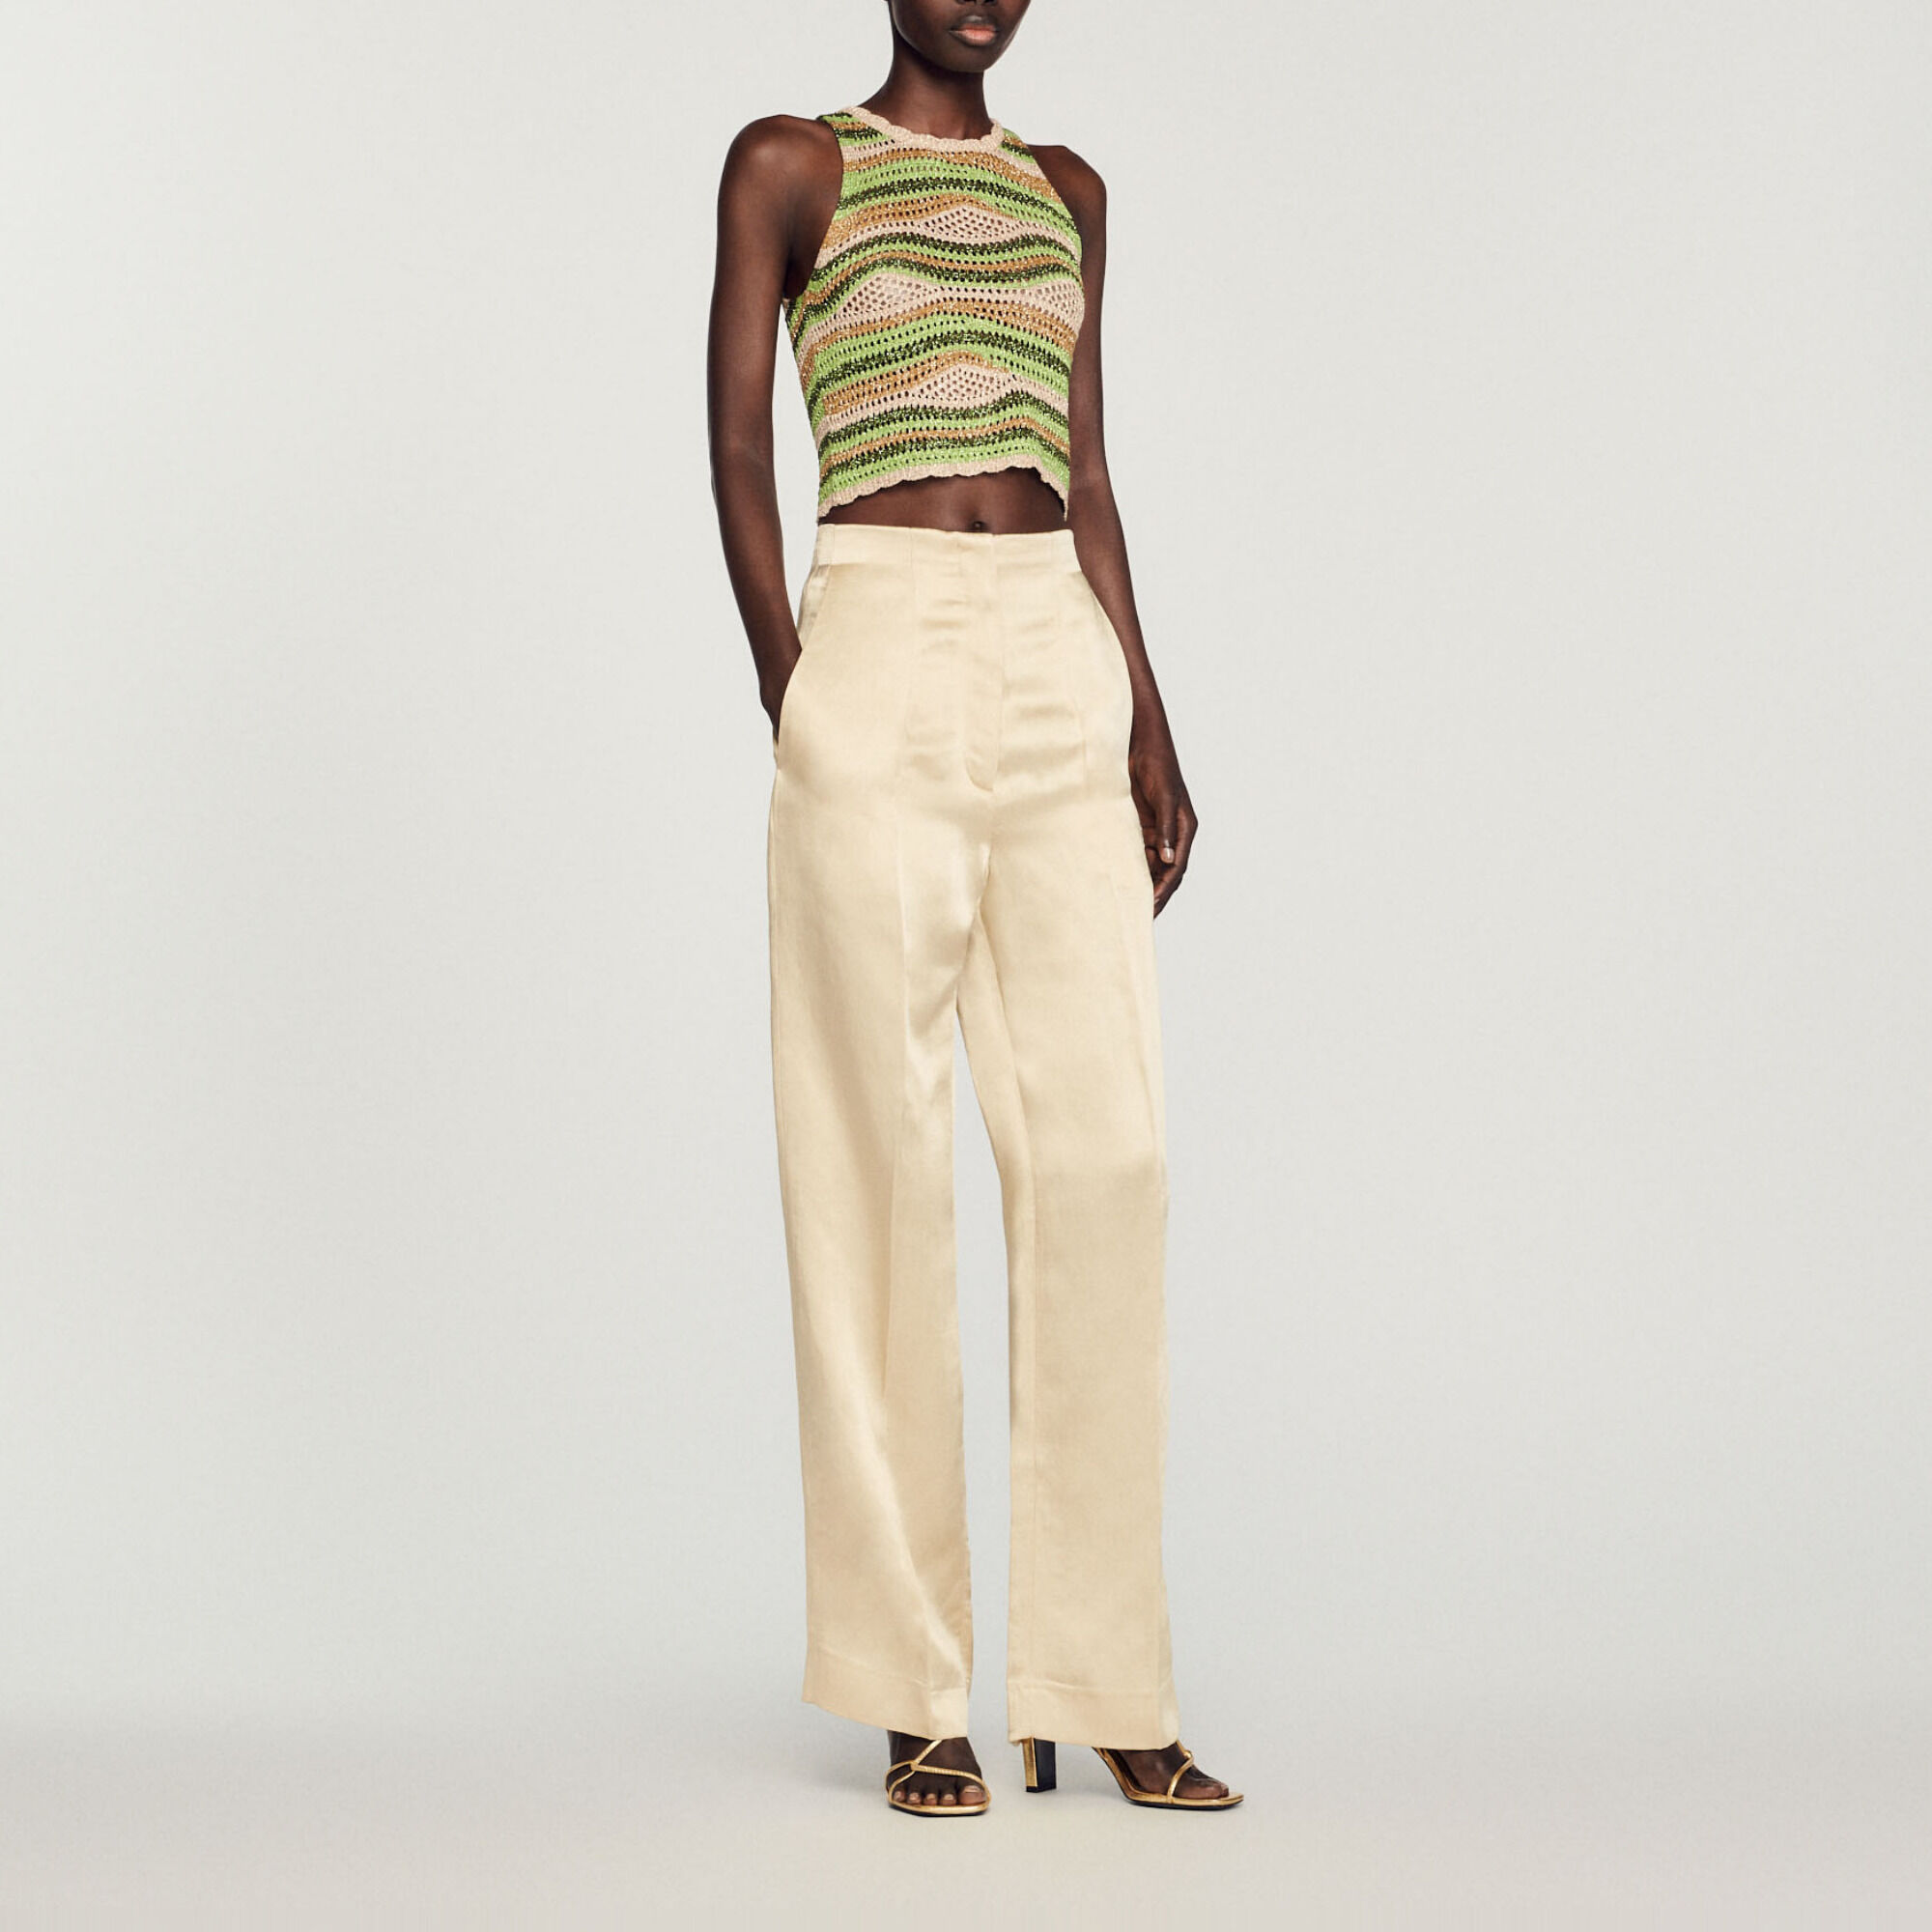 Womens High Waisted Pants  Explore our New Arrivals  ZARA United States